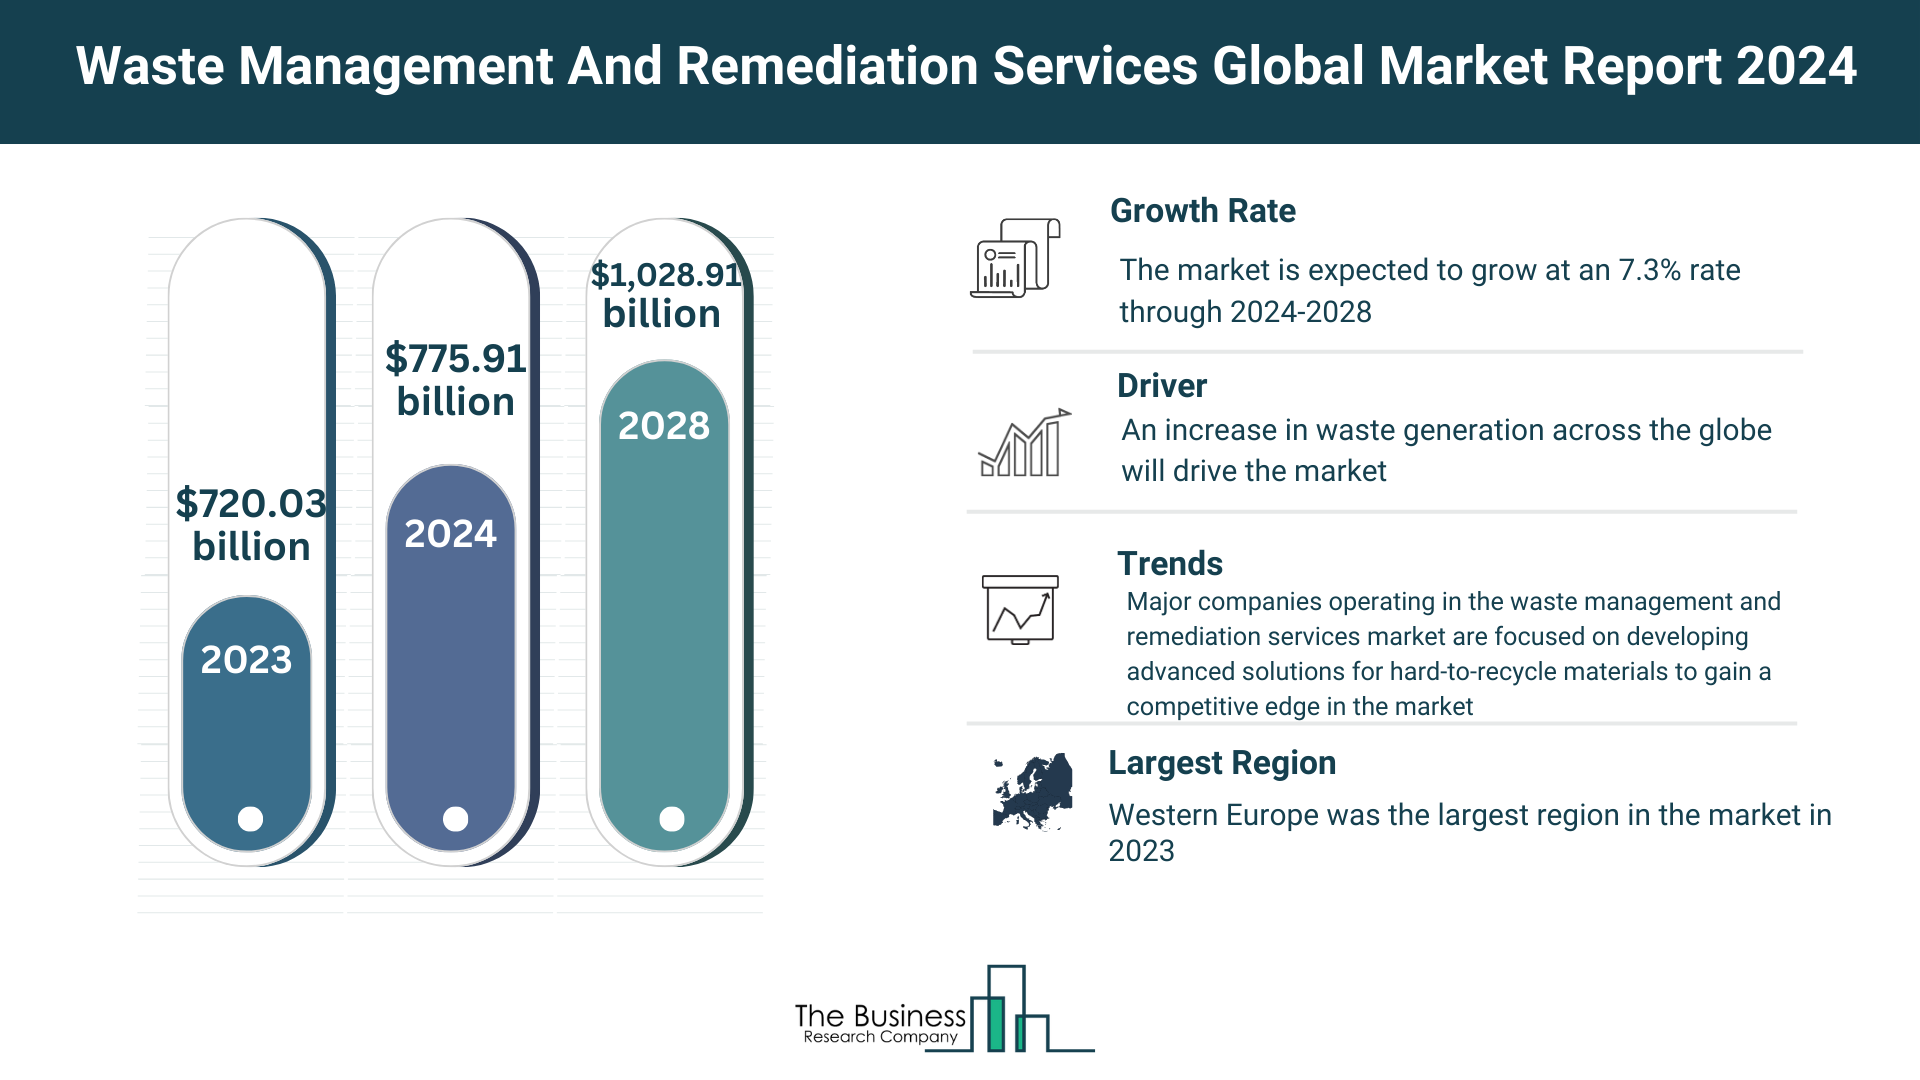 How Will Waste Management And Remediation Services Market Grow Through 2024-2033?